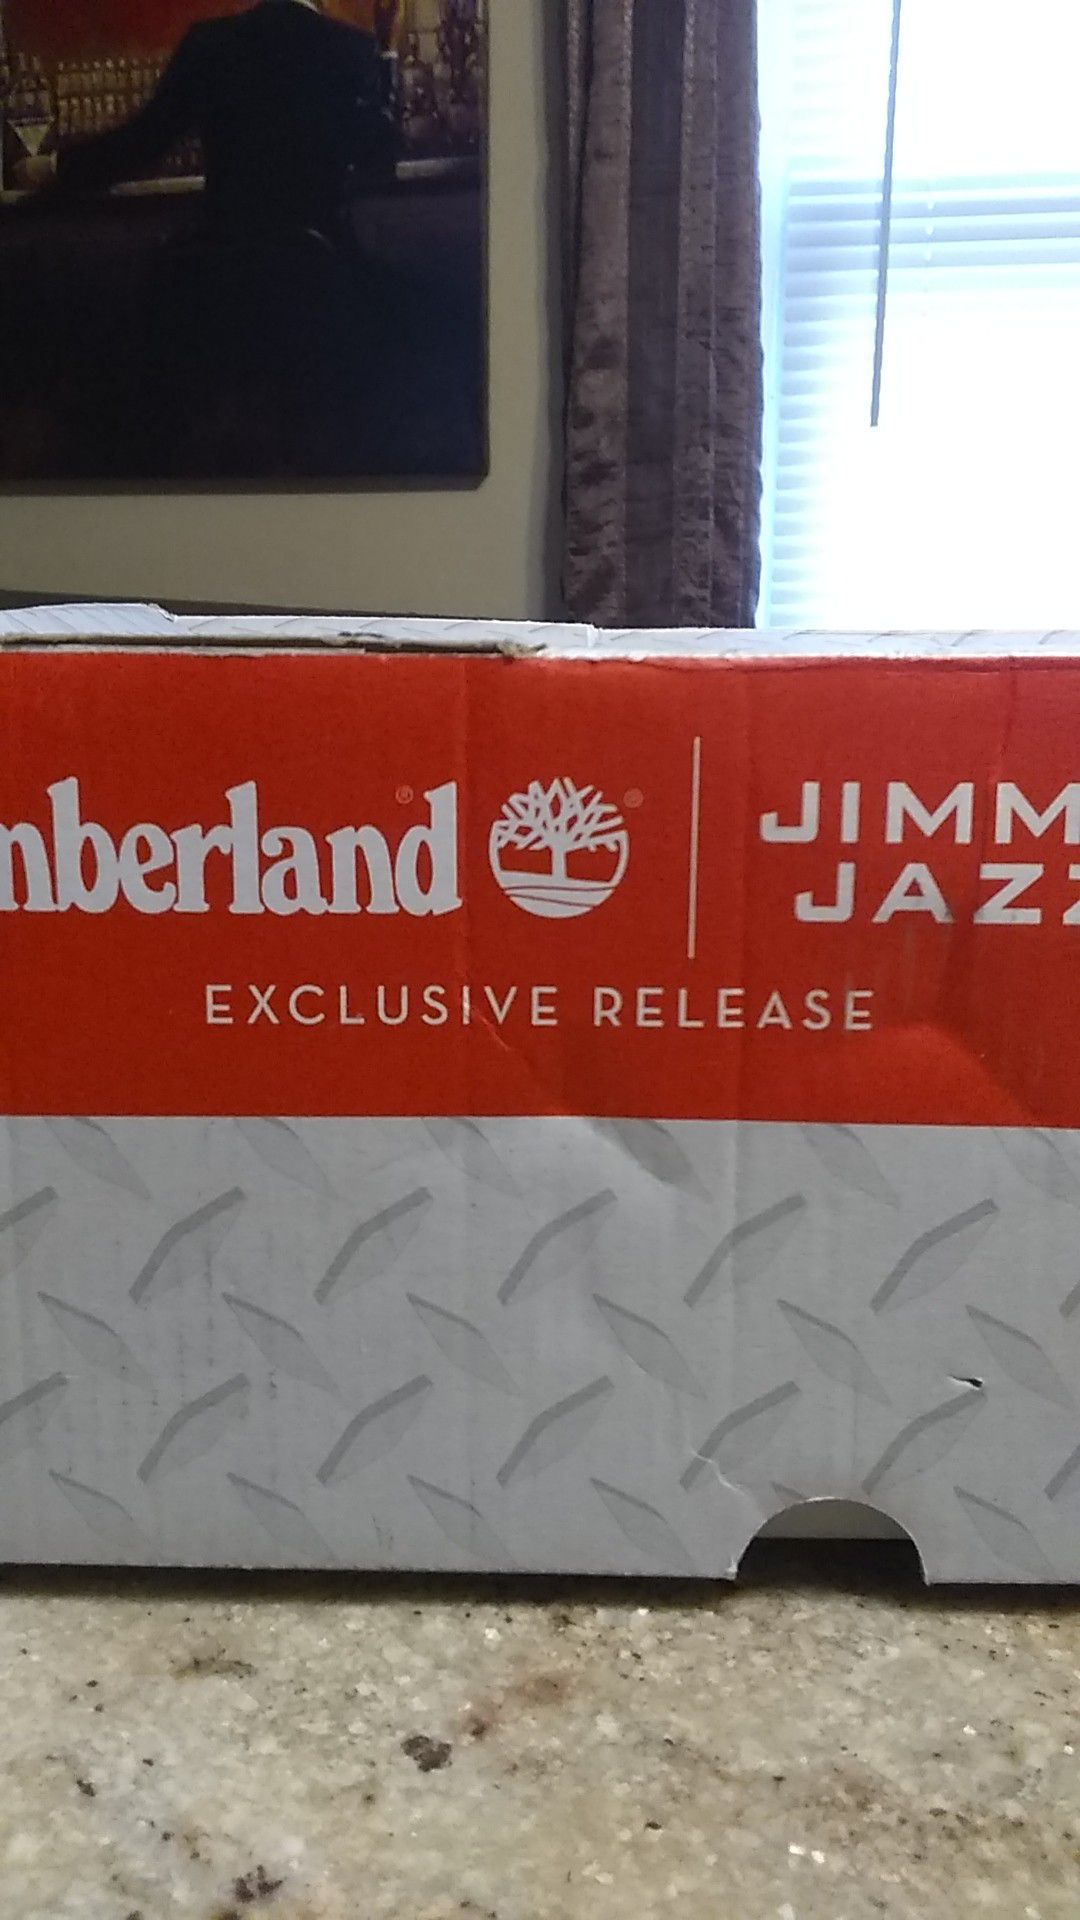 Timberland's exclusive release